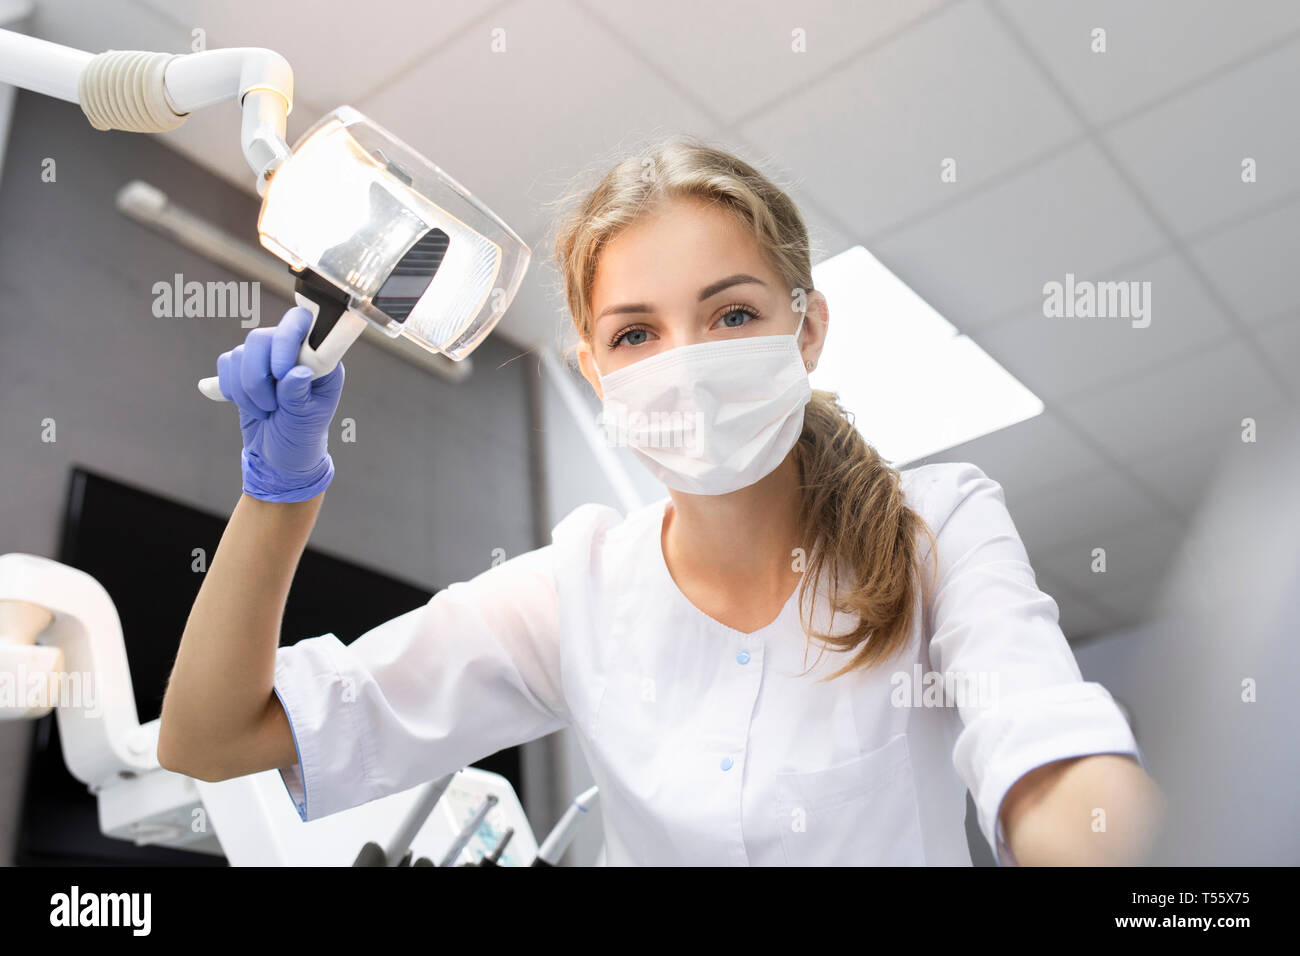 Patient point of view of dental assistant holding light Stock Photo